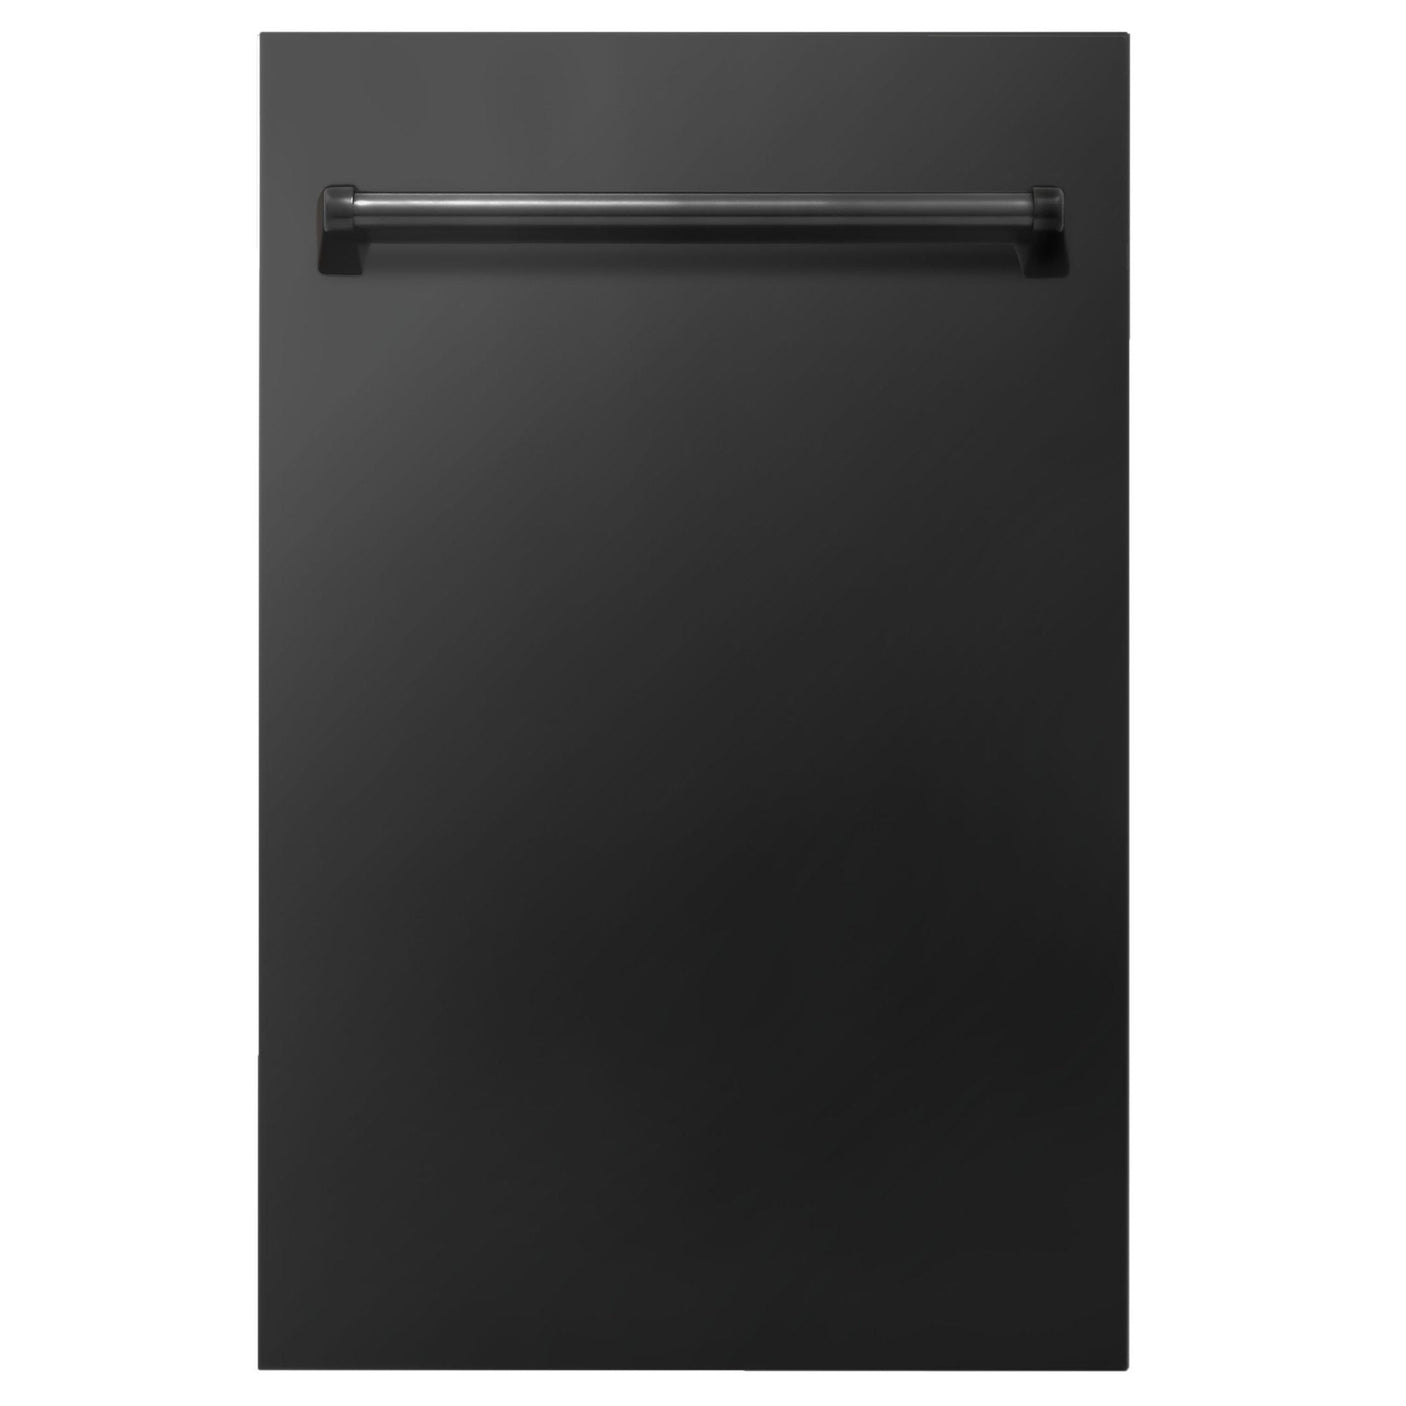 ZLINE 18 in. Dishwasher Panel with Traditional Handle (DP-18) [Color: DuraSnow Stainless Steel]